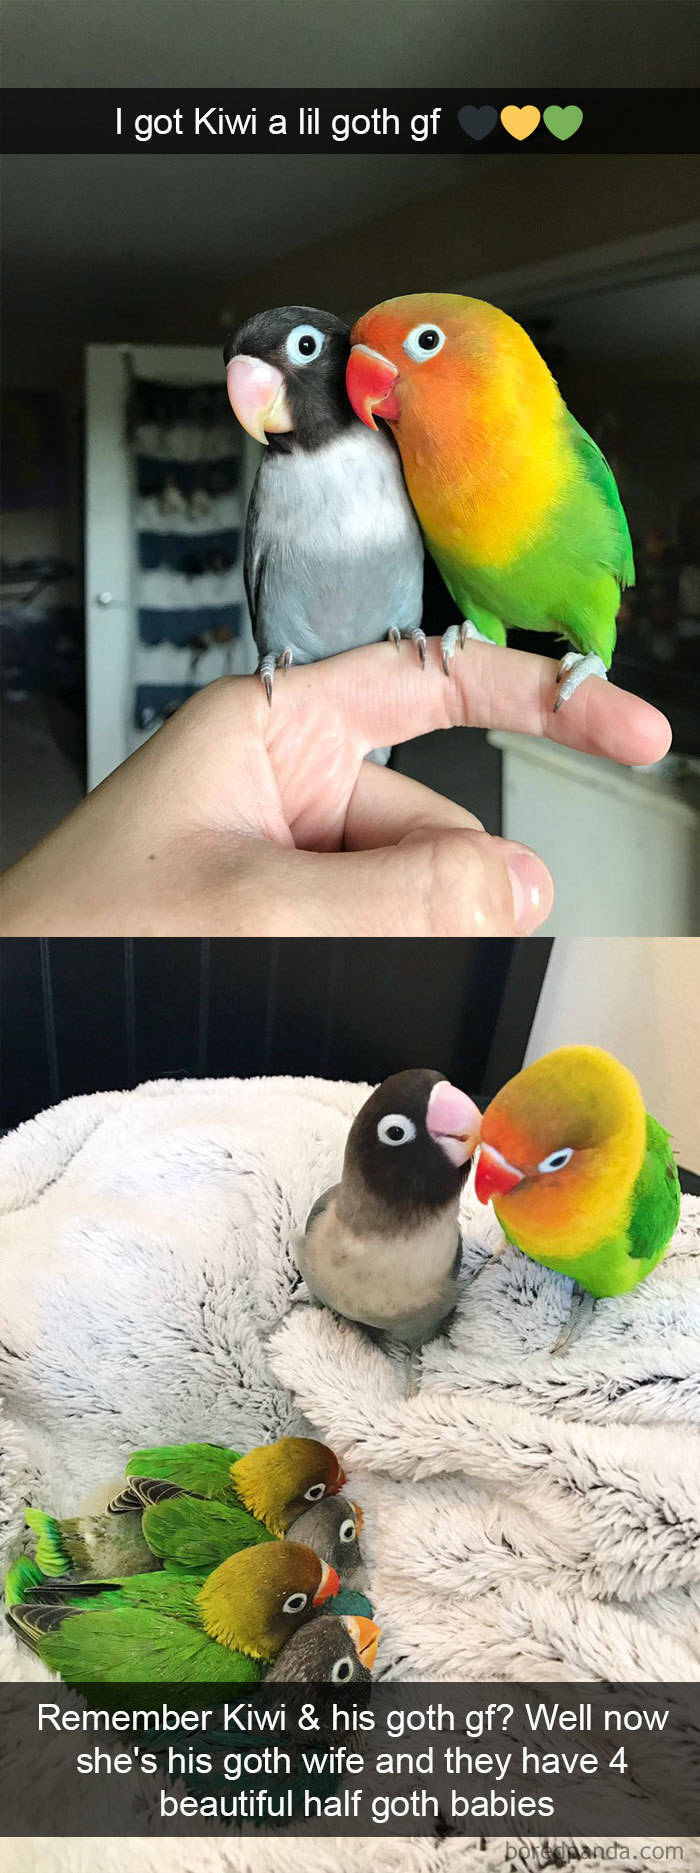 Step Aside, Cats And Dogs. Snapchat Belongs To The Birds Now